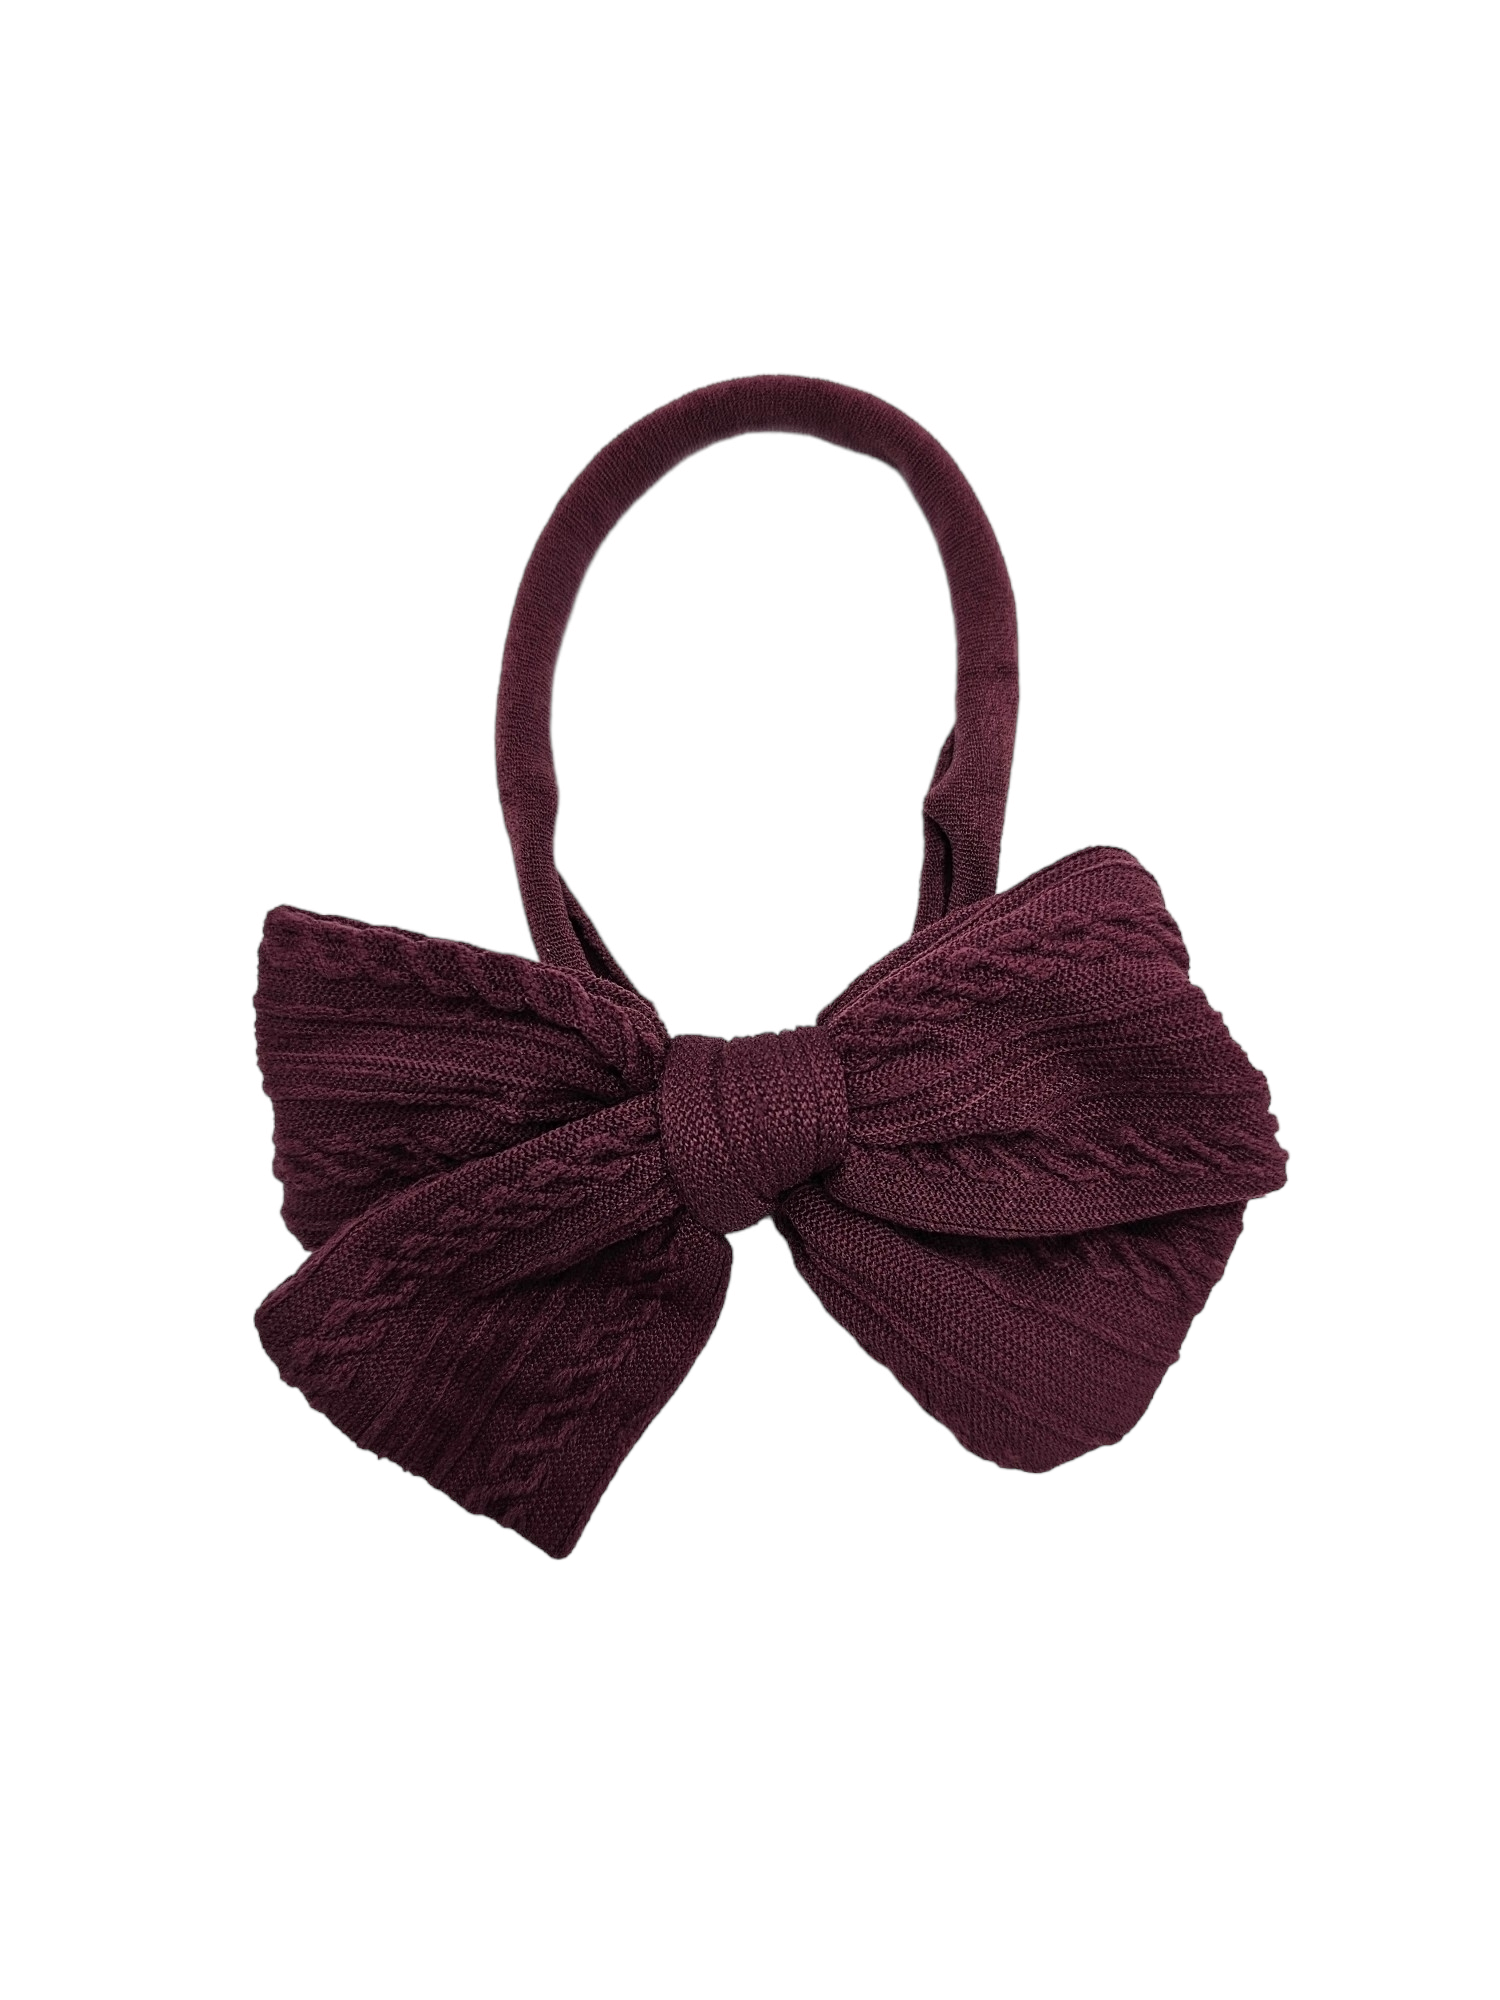 Maroon 3.5 Inch Cable Knit Dainty Bow Headband - Betty Brown Boutique Ltd